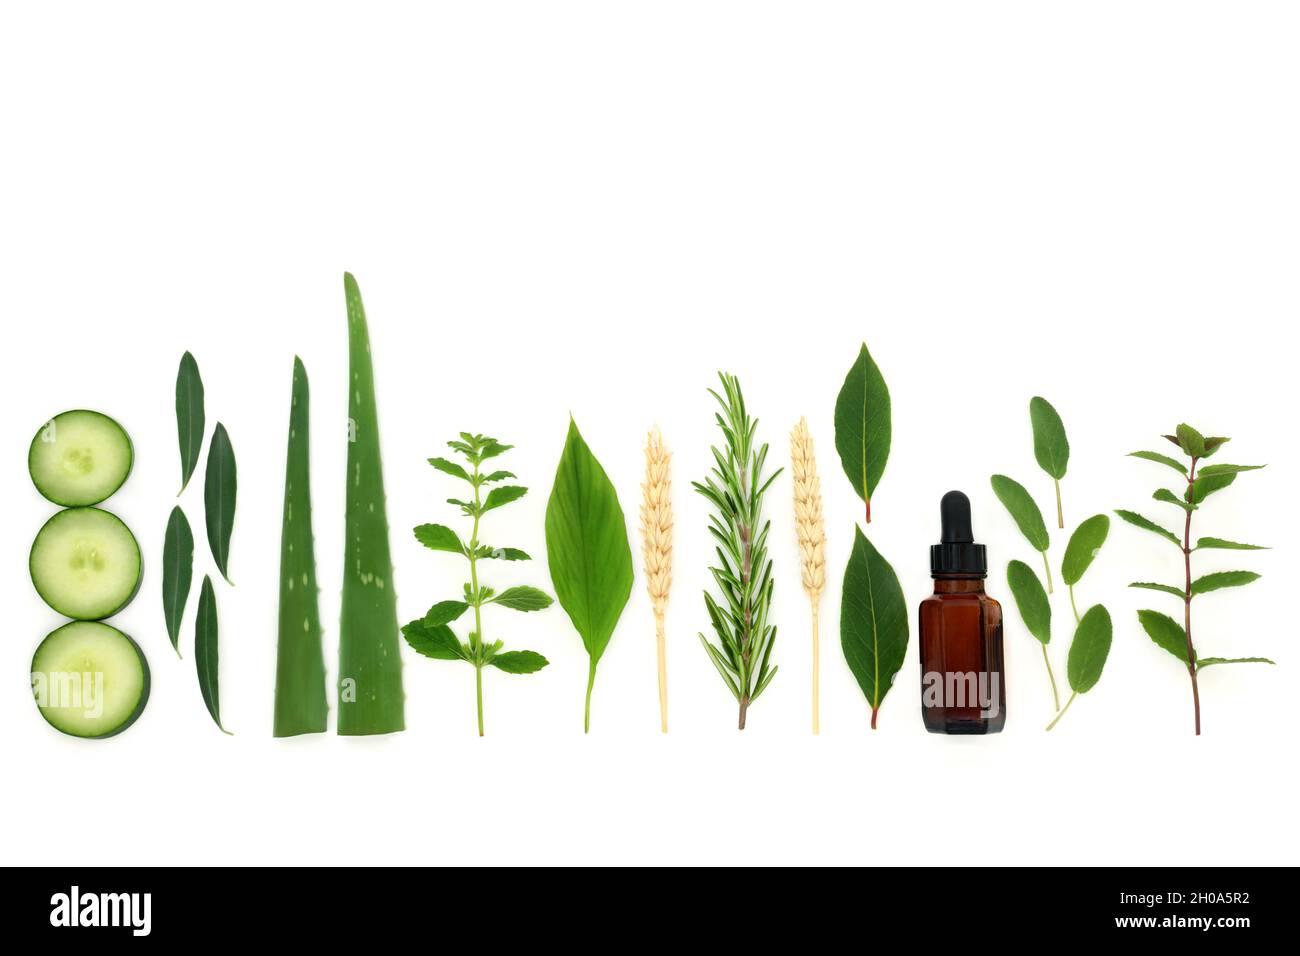 Herbs for natural skincare essential oil products with herb leaves, wheat and cucumber. Anti aging benefits, eases psoriasis, acne and eczema. Stock Photo